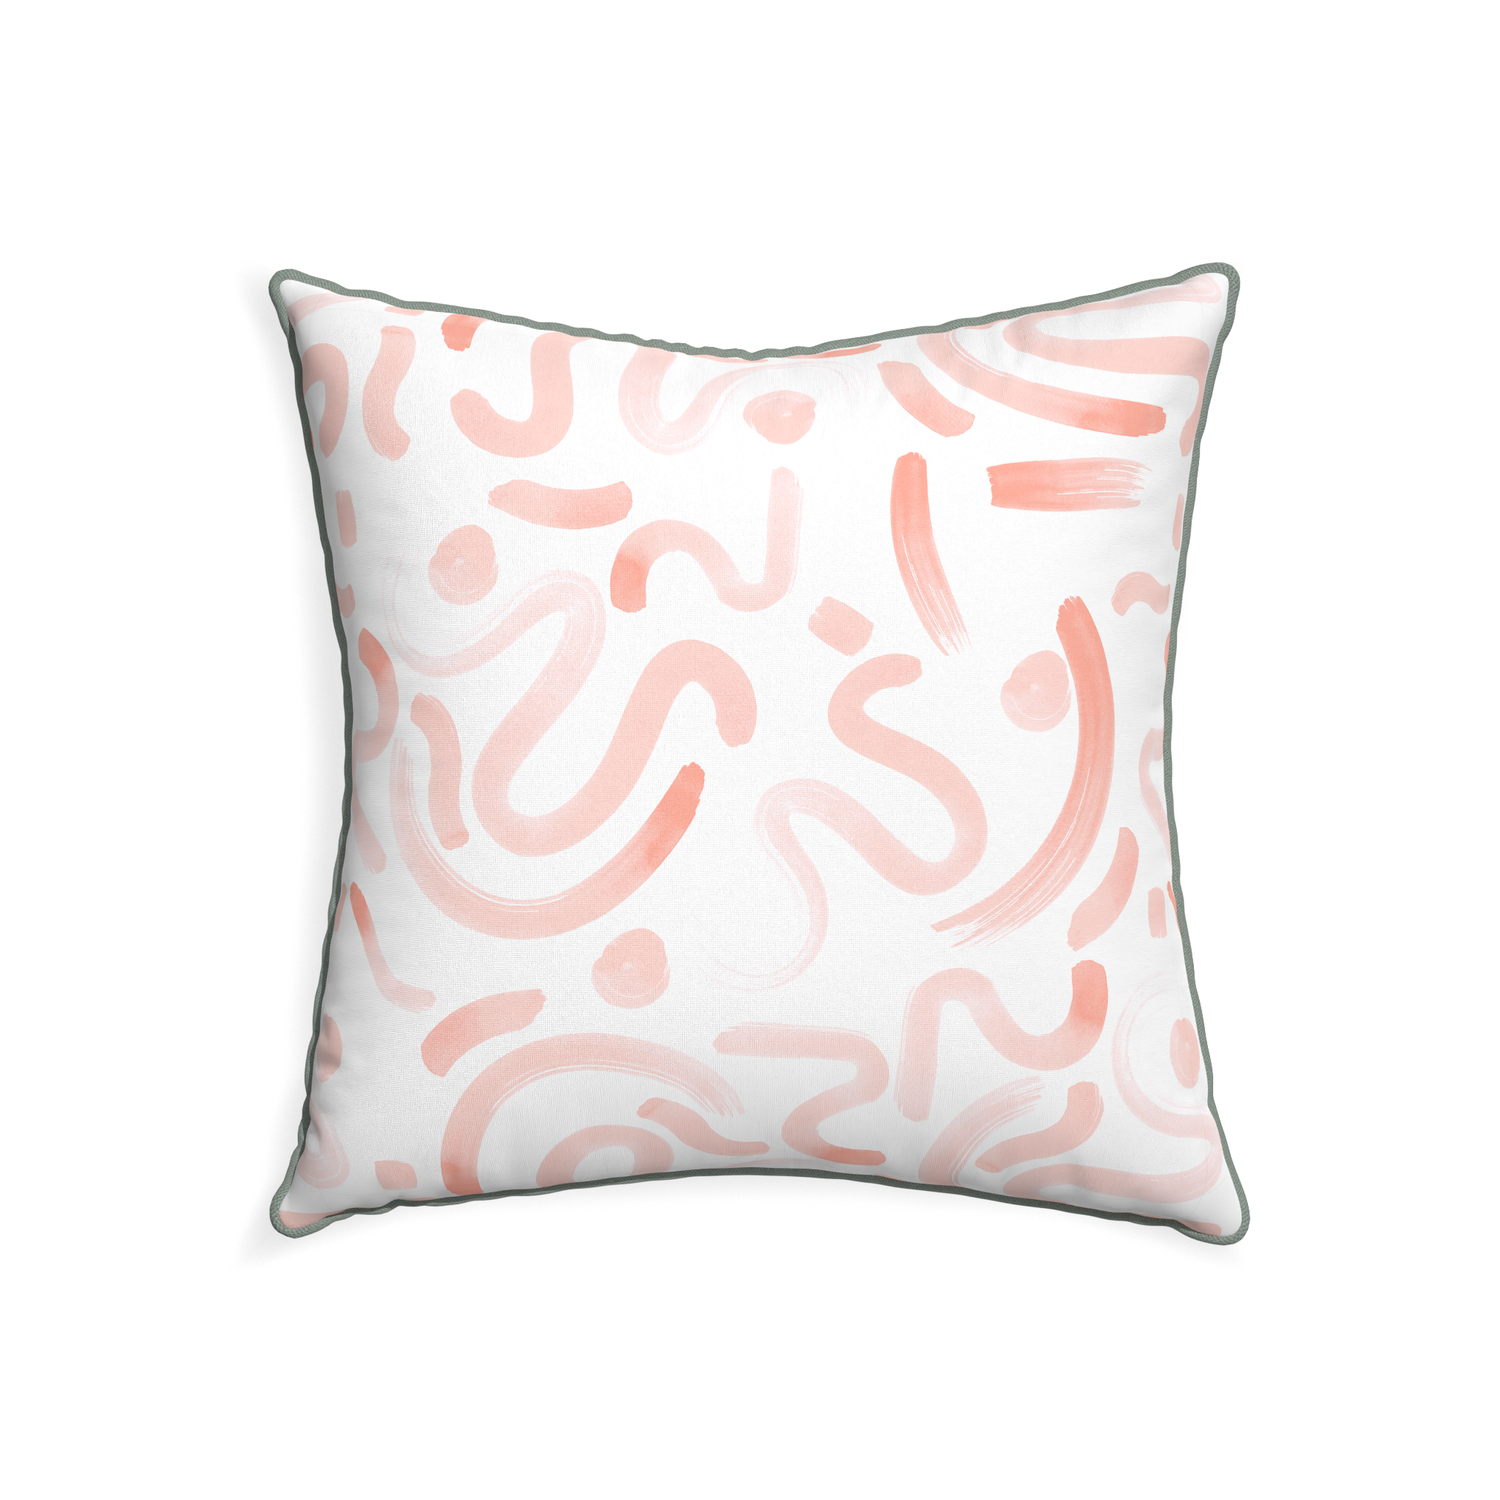 22-square hockney pink custom pink graphicpillow with sage piping on white background